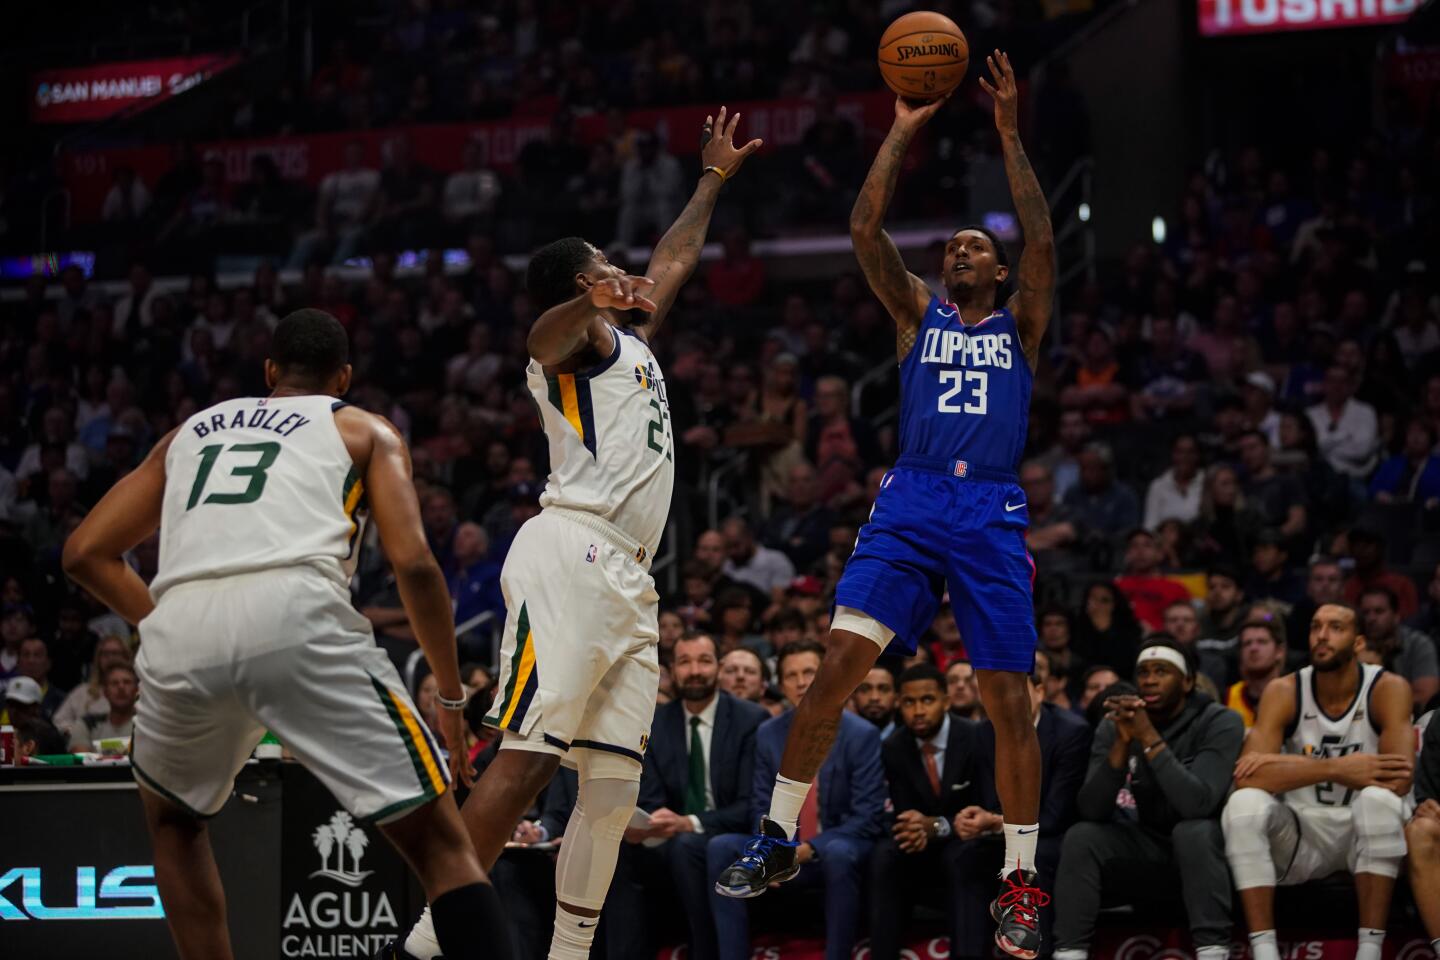 LOS ANGELES, CALIF. - NOVEMBER 03: LA Clippers guard Lou Williams (23) shoots the ball during a NBA game between the Utah Jazz and the LA Clippers at Staples Center on Sunday, Nov. 3, 2019 in Los Angeles, Calif. (Kent Nishimura / Los Angeles Times)